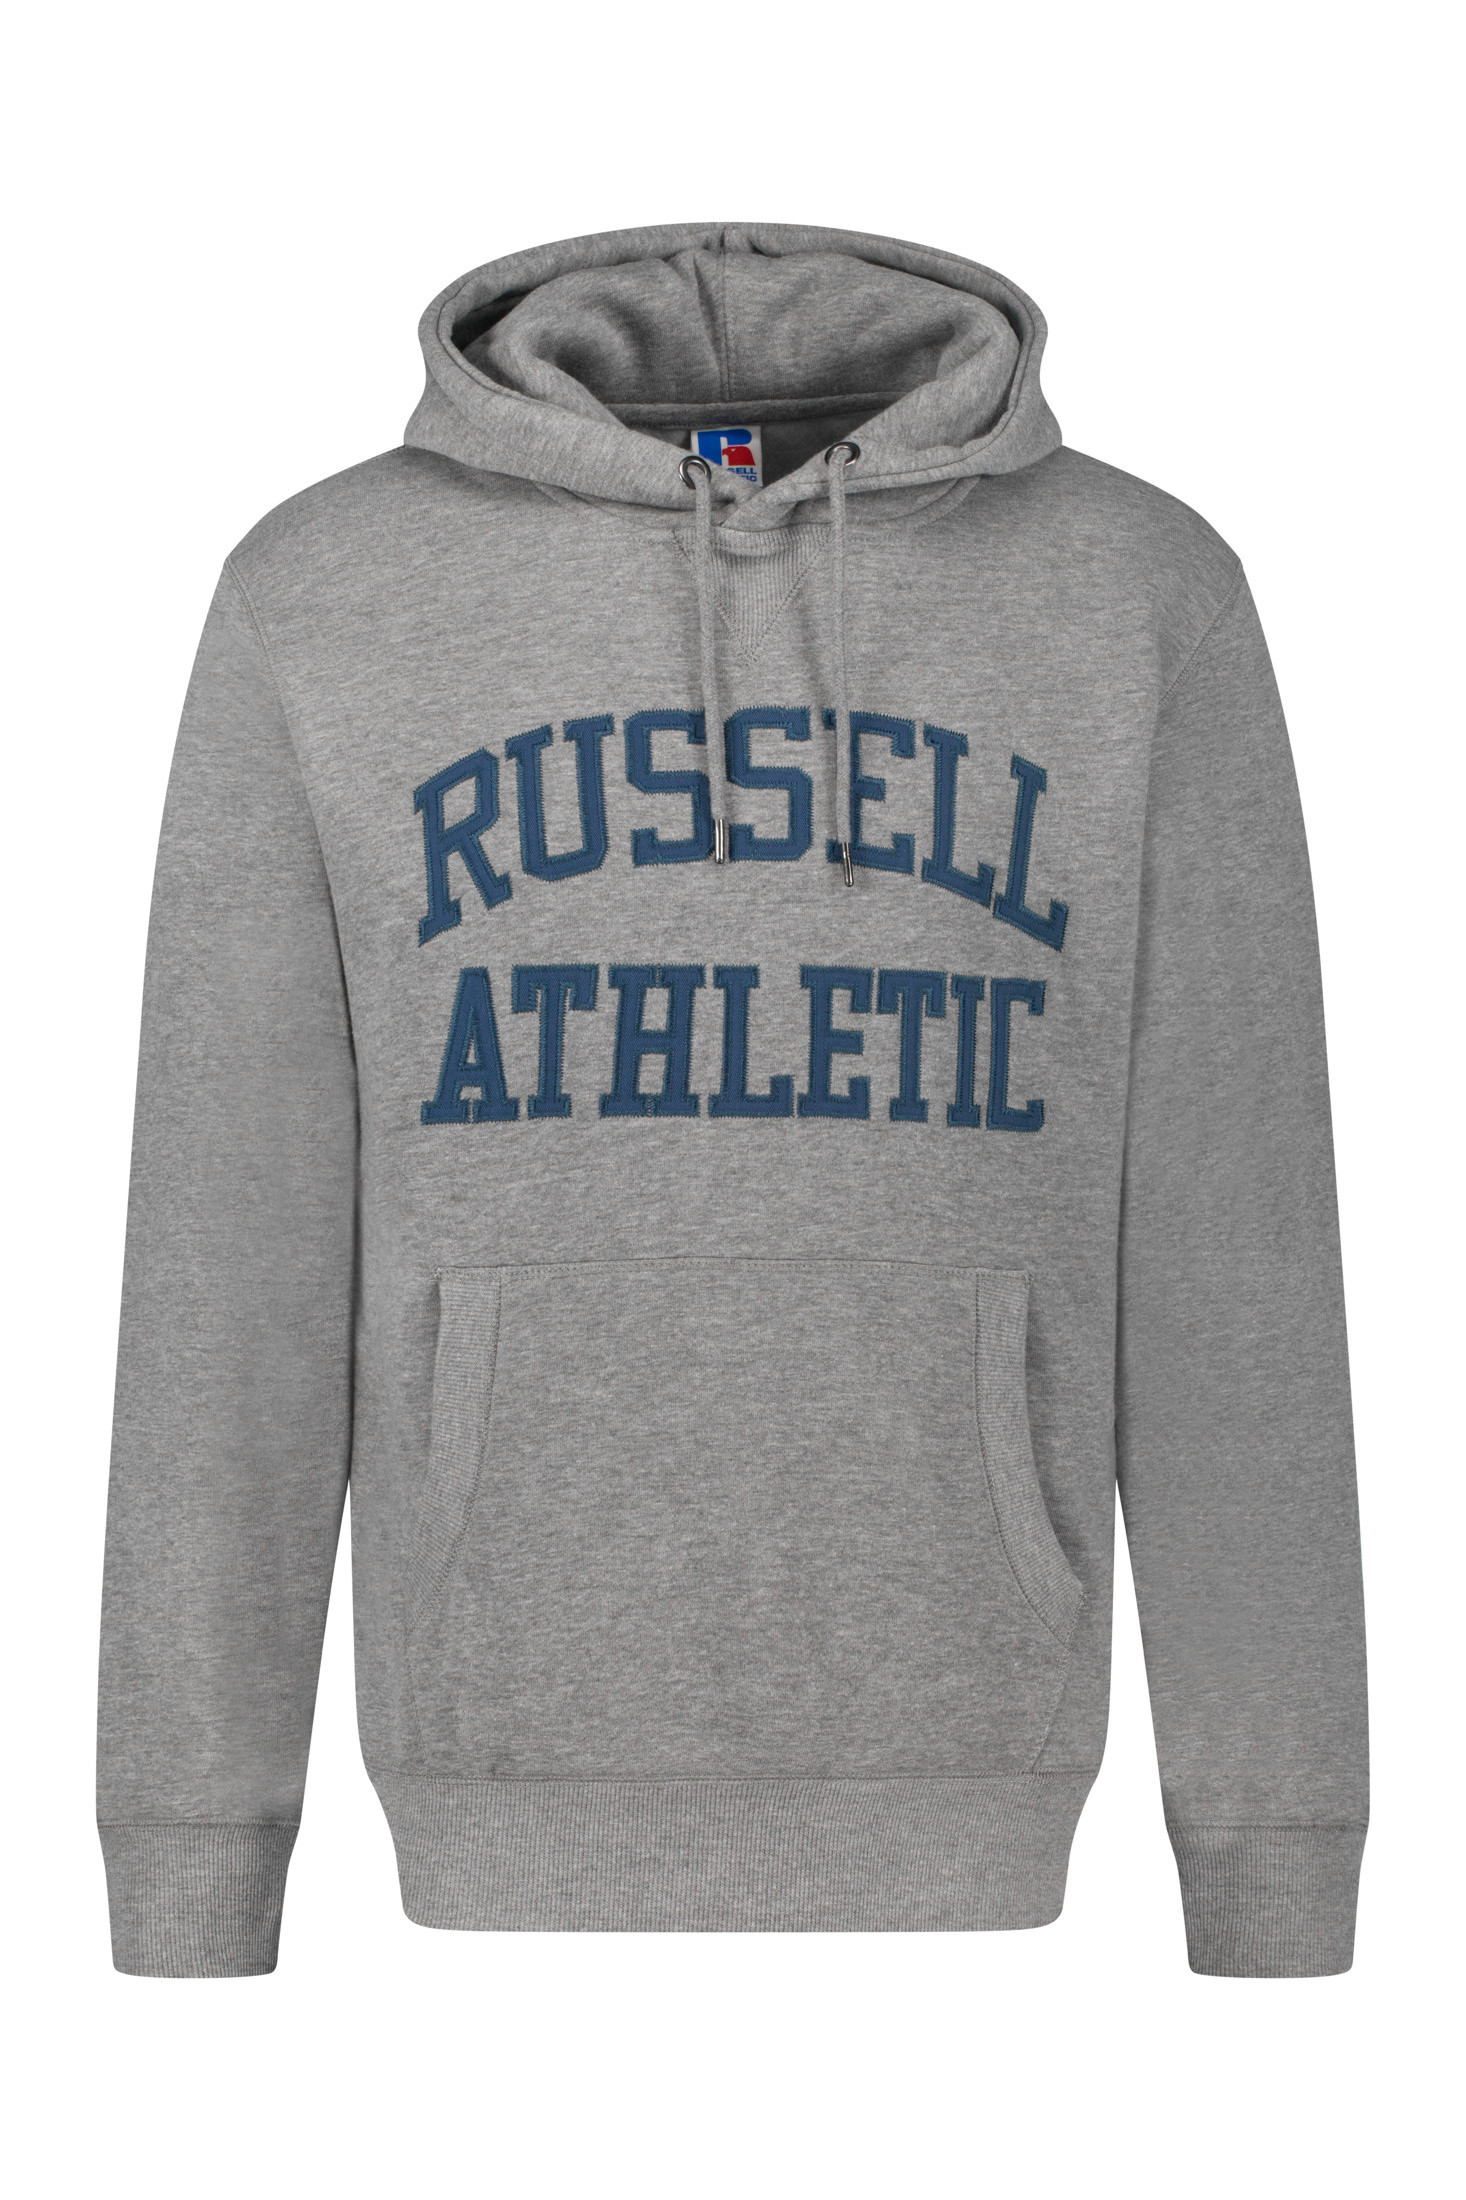 Russell Athletic - Hoodie, Light Grey, large image number 0